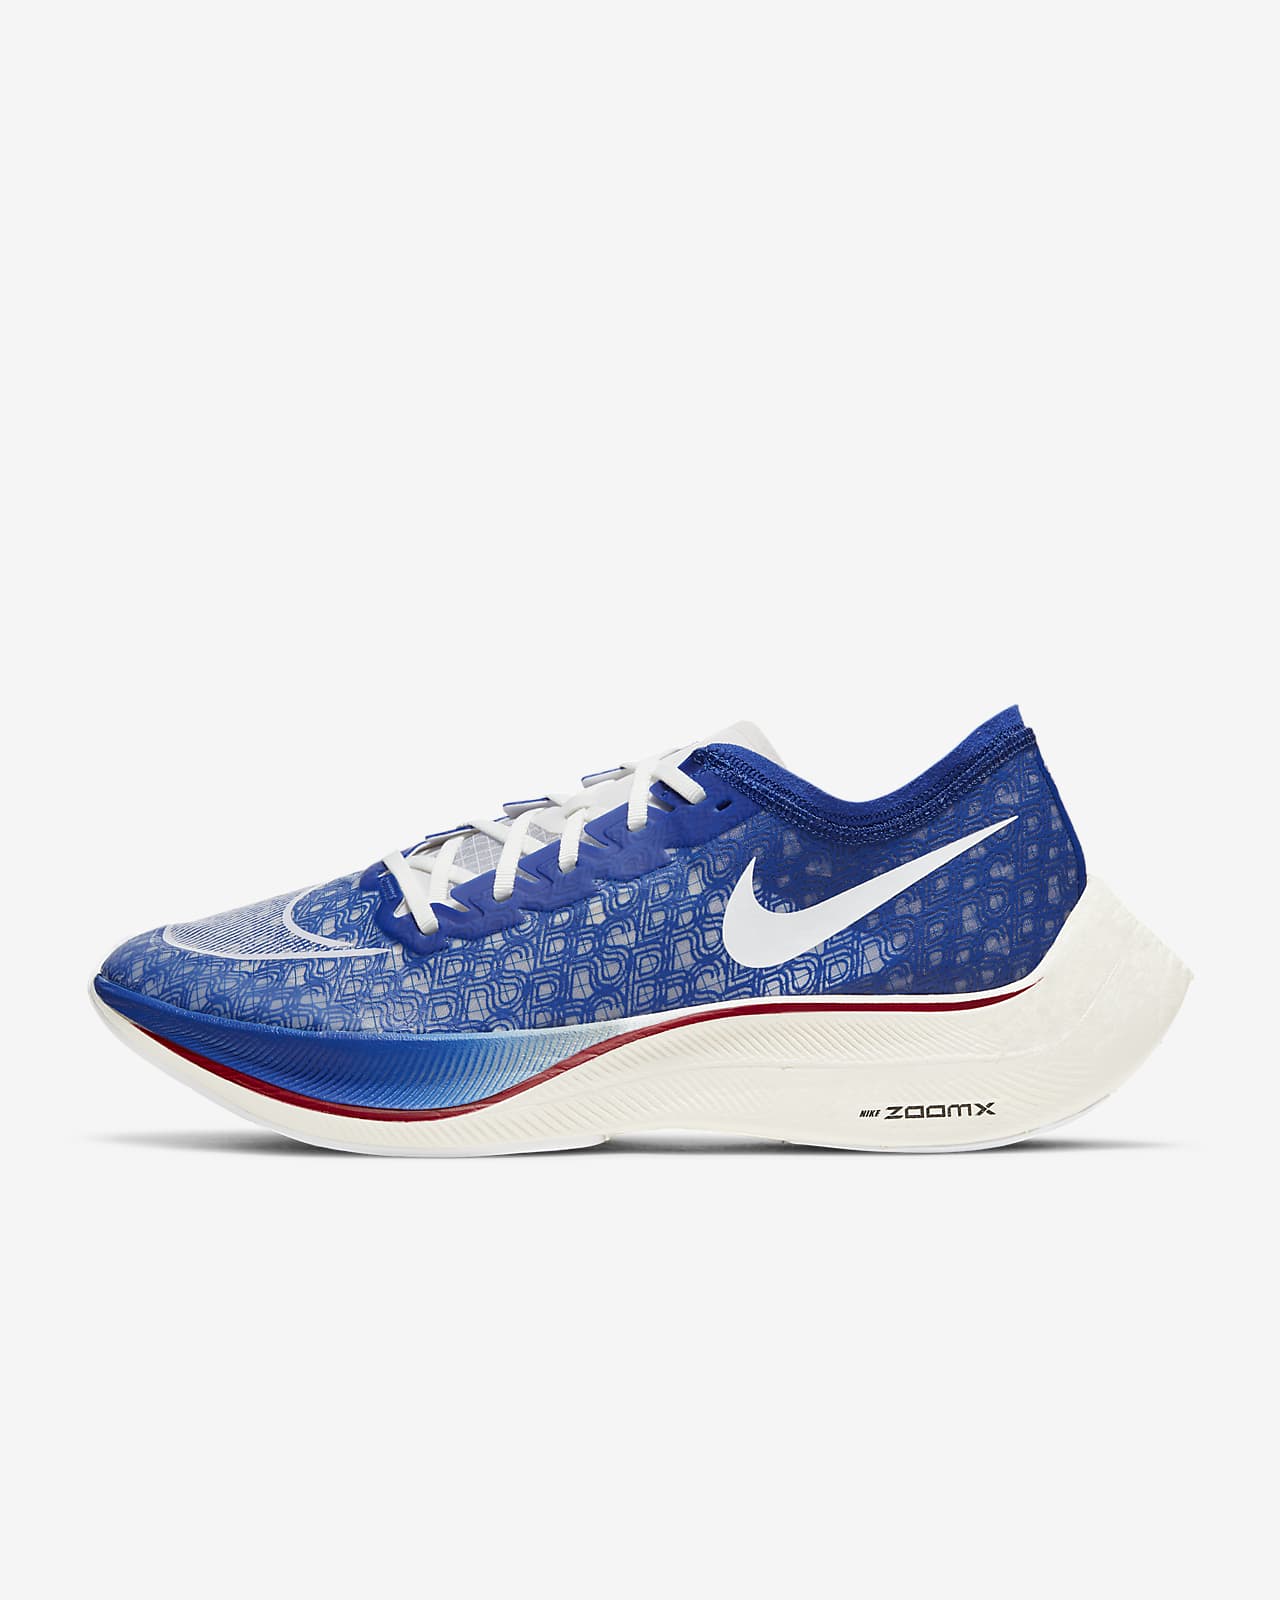 where can i buy nike zoomx vaporfly next